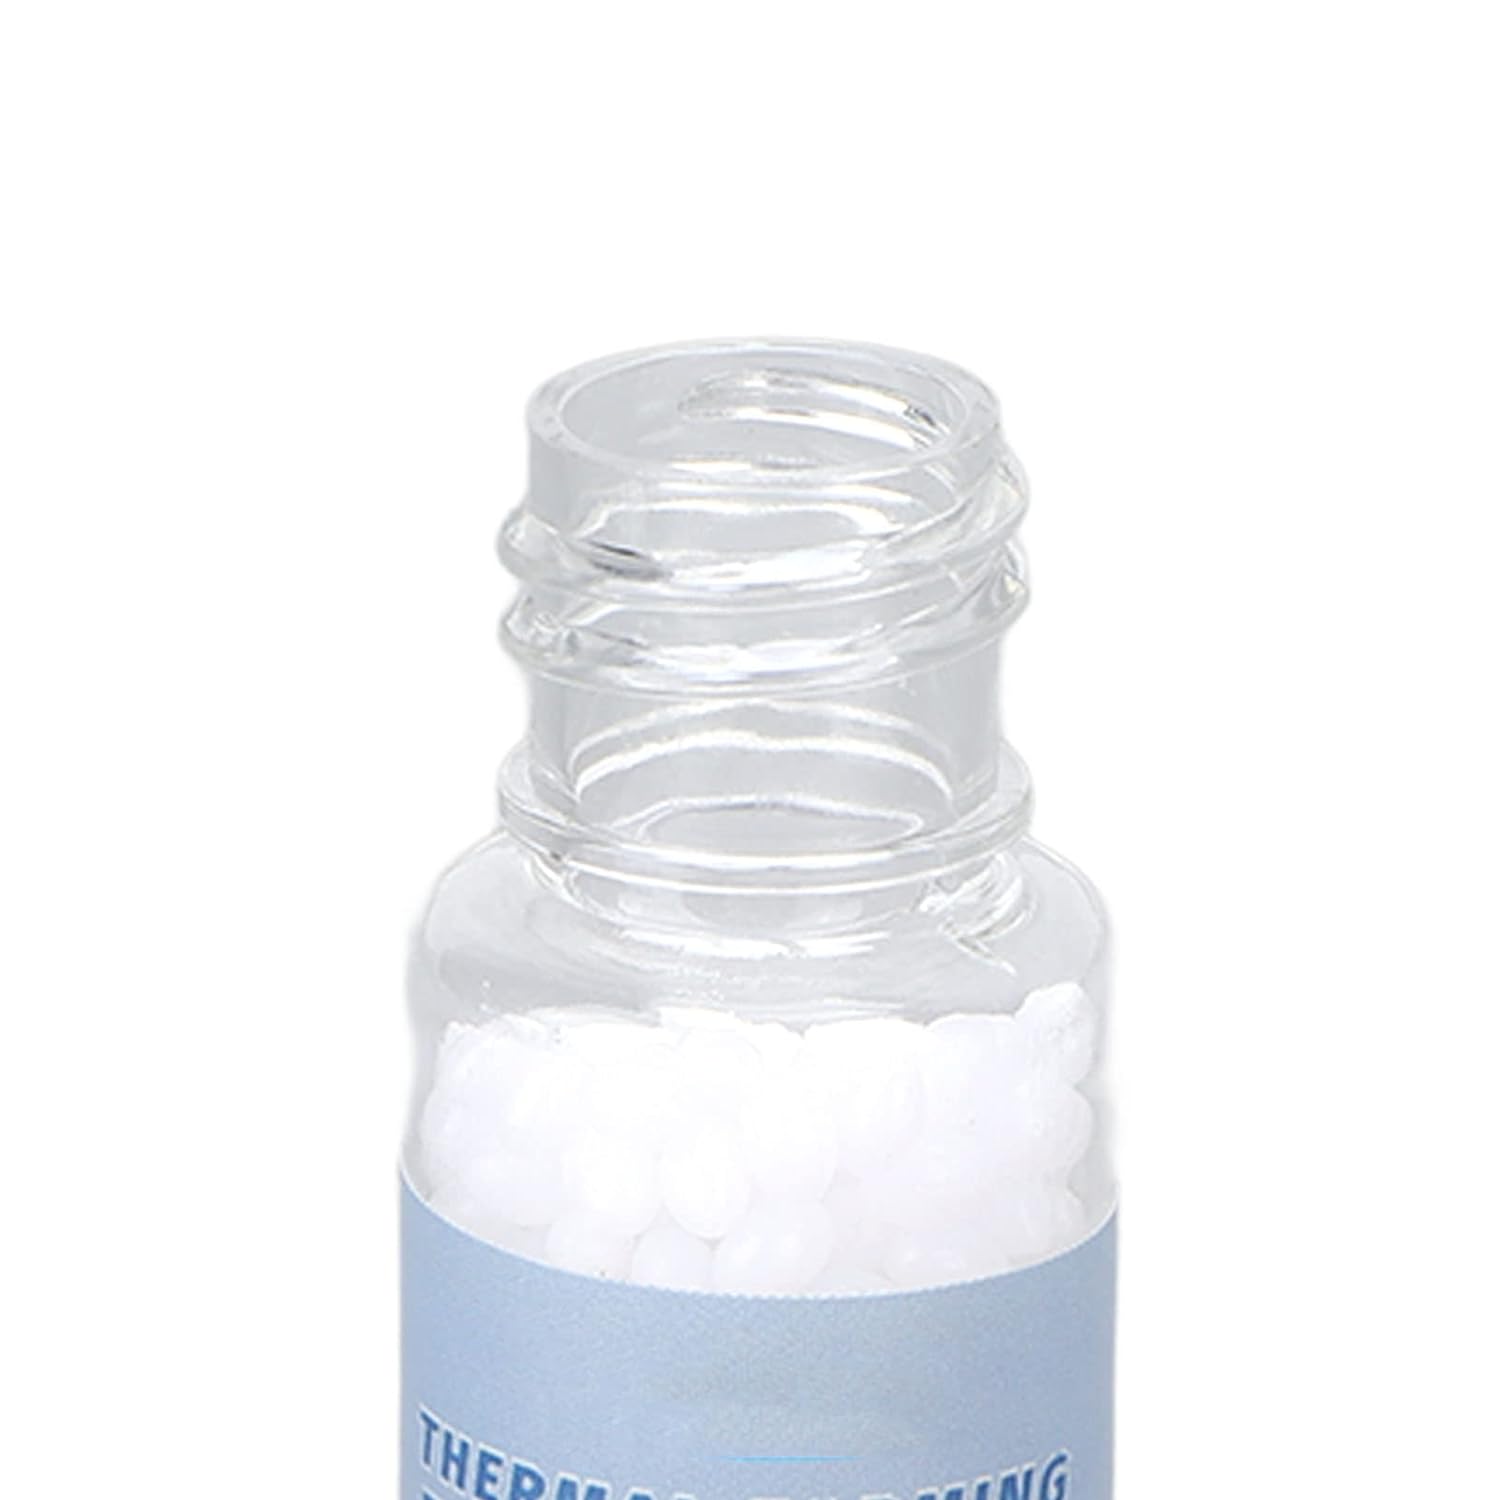 20g Tooth Filling Thermo Beads, Temporary Tooth Repair Kit, 